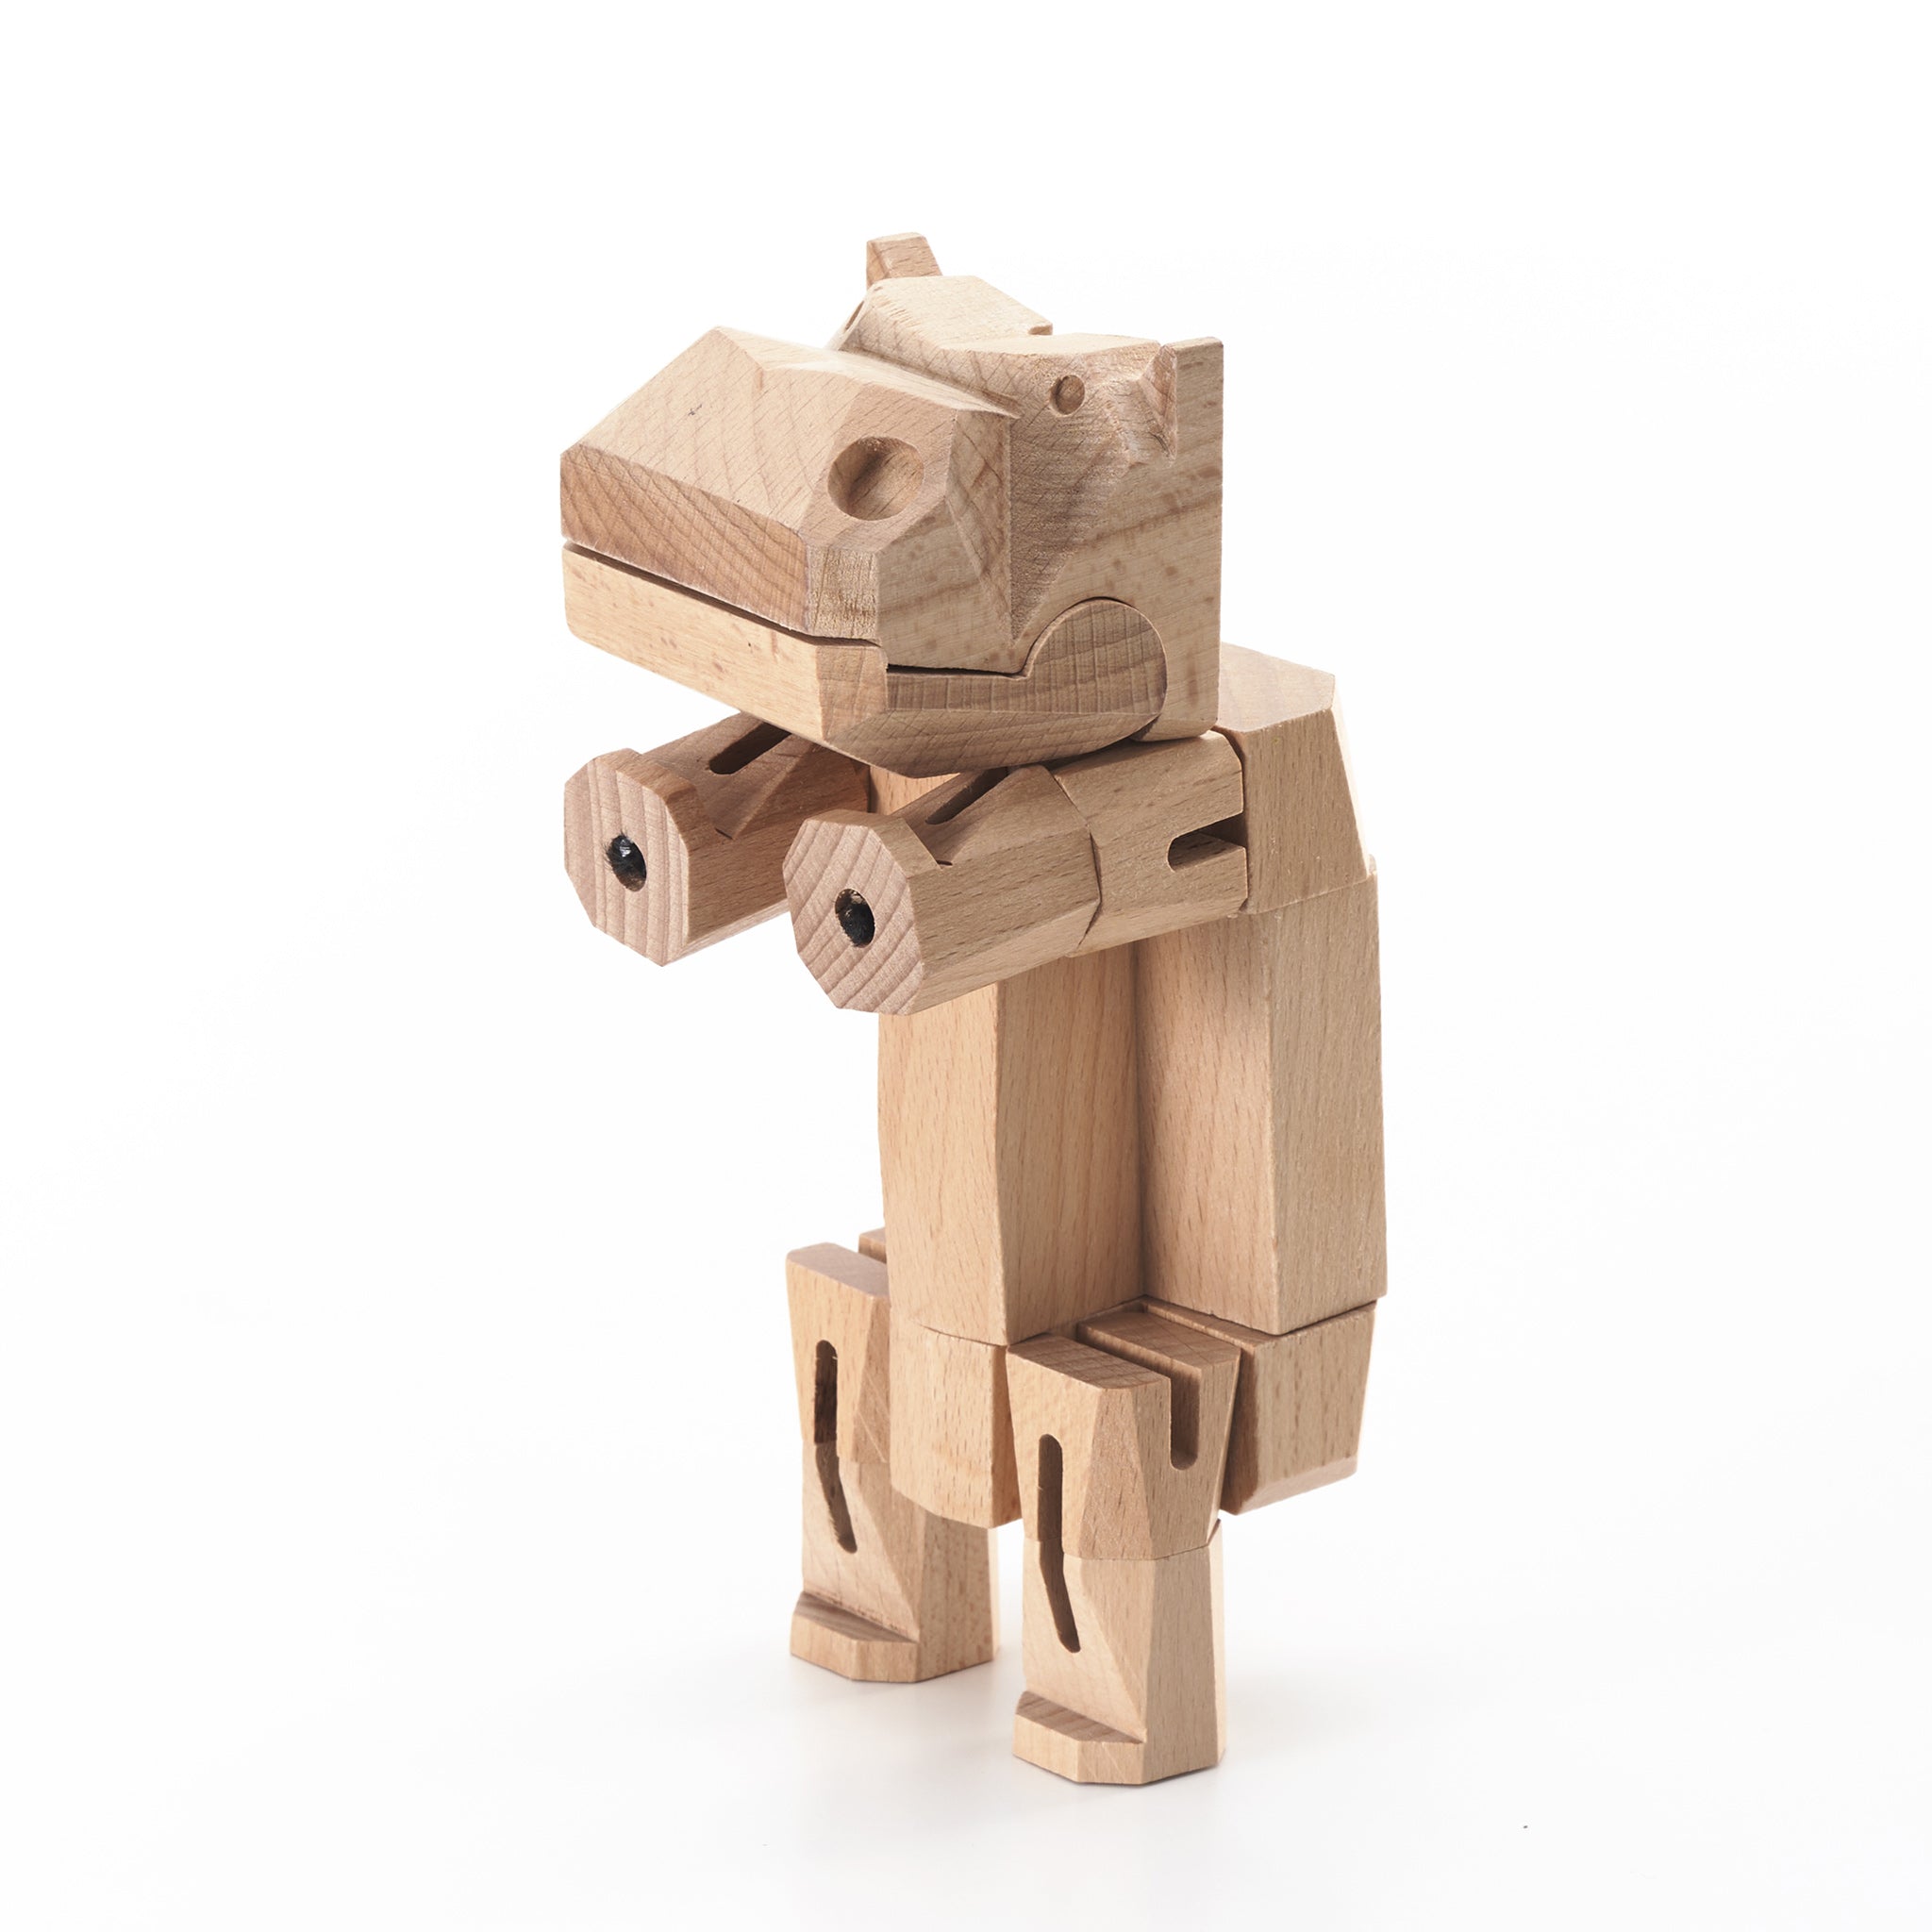 Morphits ® Hippo Wooden Toy: Explore the Wild with Poseable Wooden Playset Friends - Yoshiaki Ito Design Stand N2